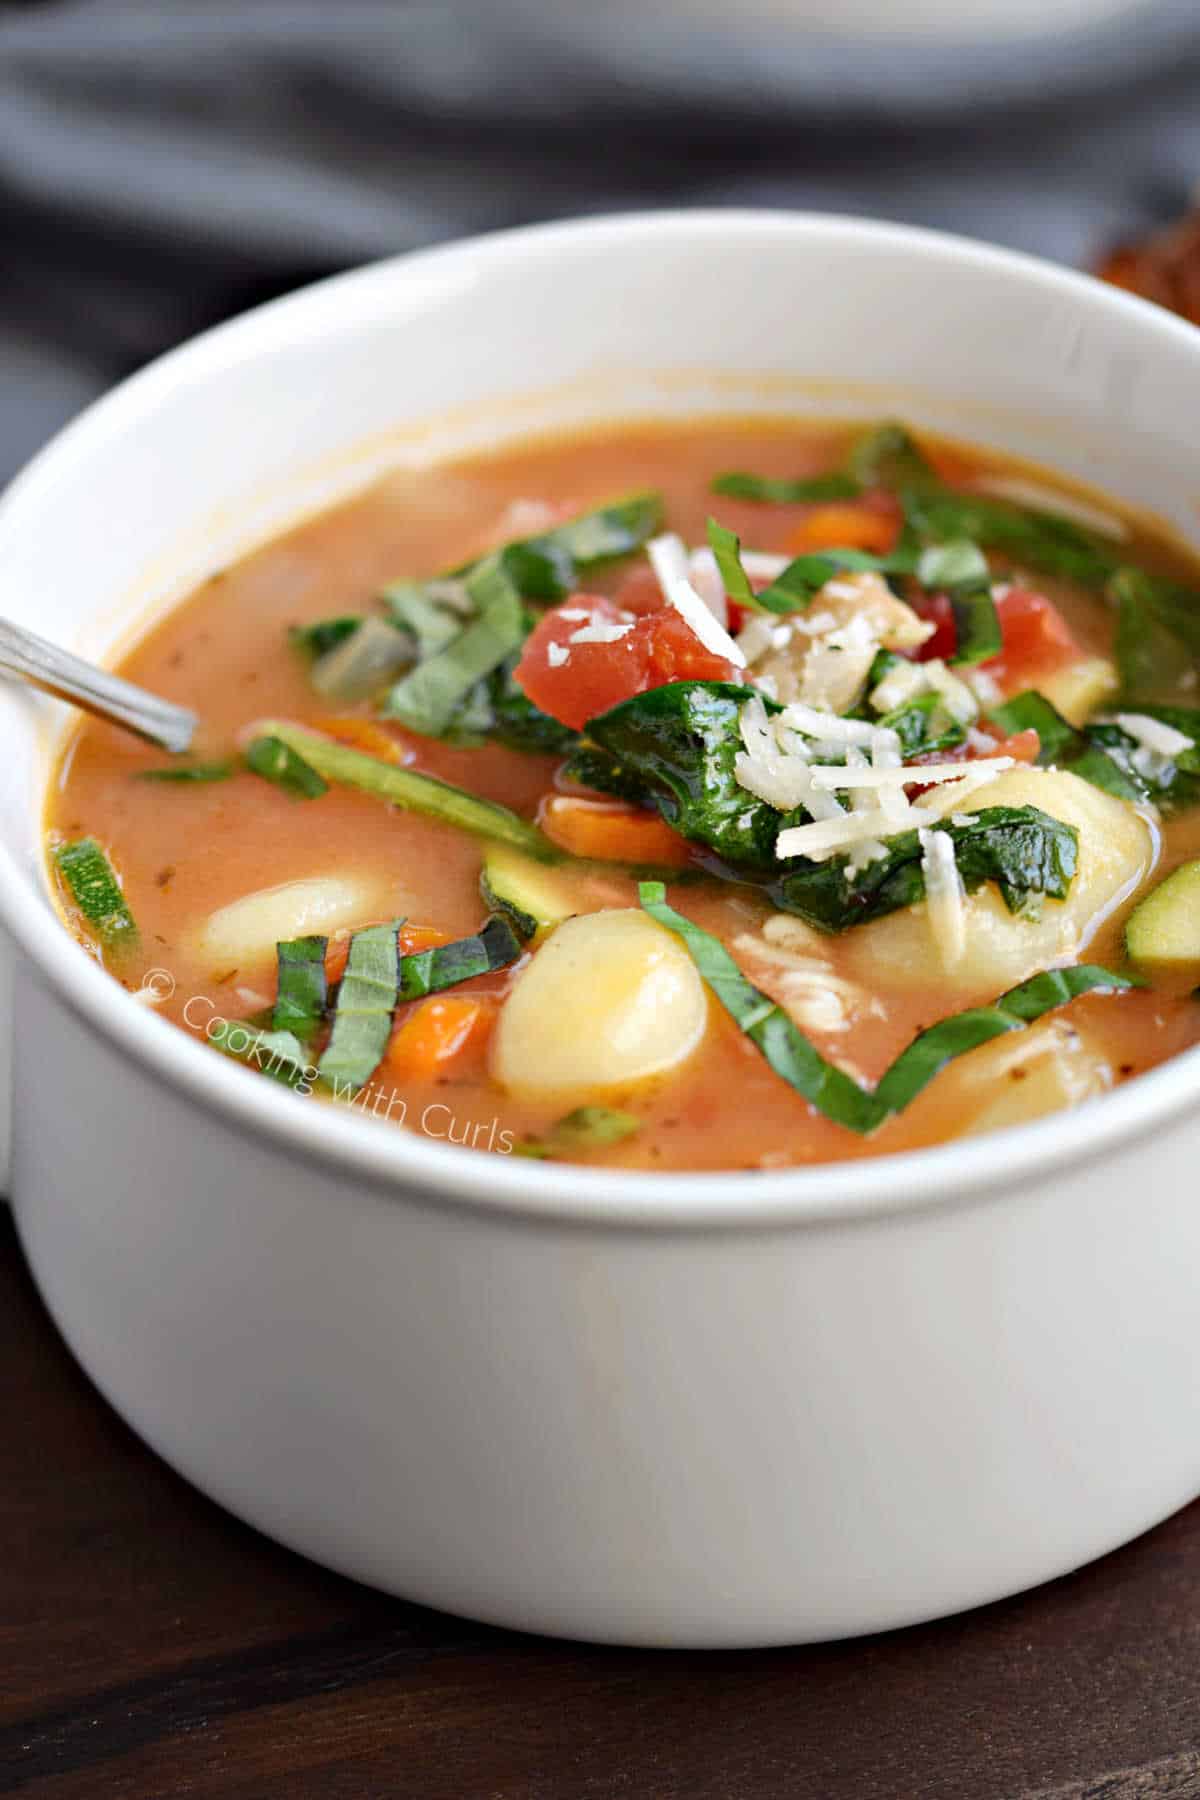 Gnocchi, carrots, zucchini, tomatoes, spinach, and grated parmesan in a soup bowl.